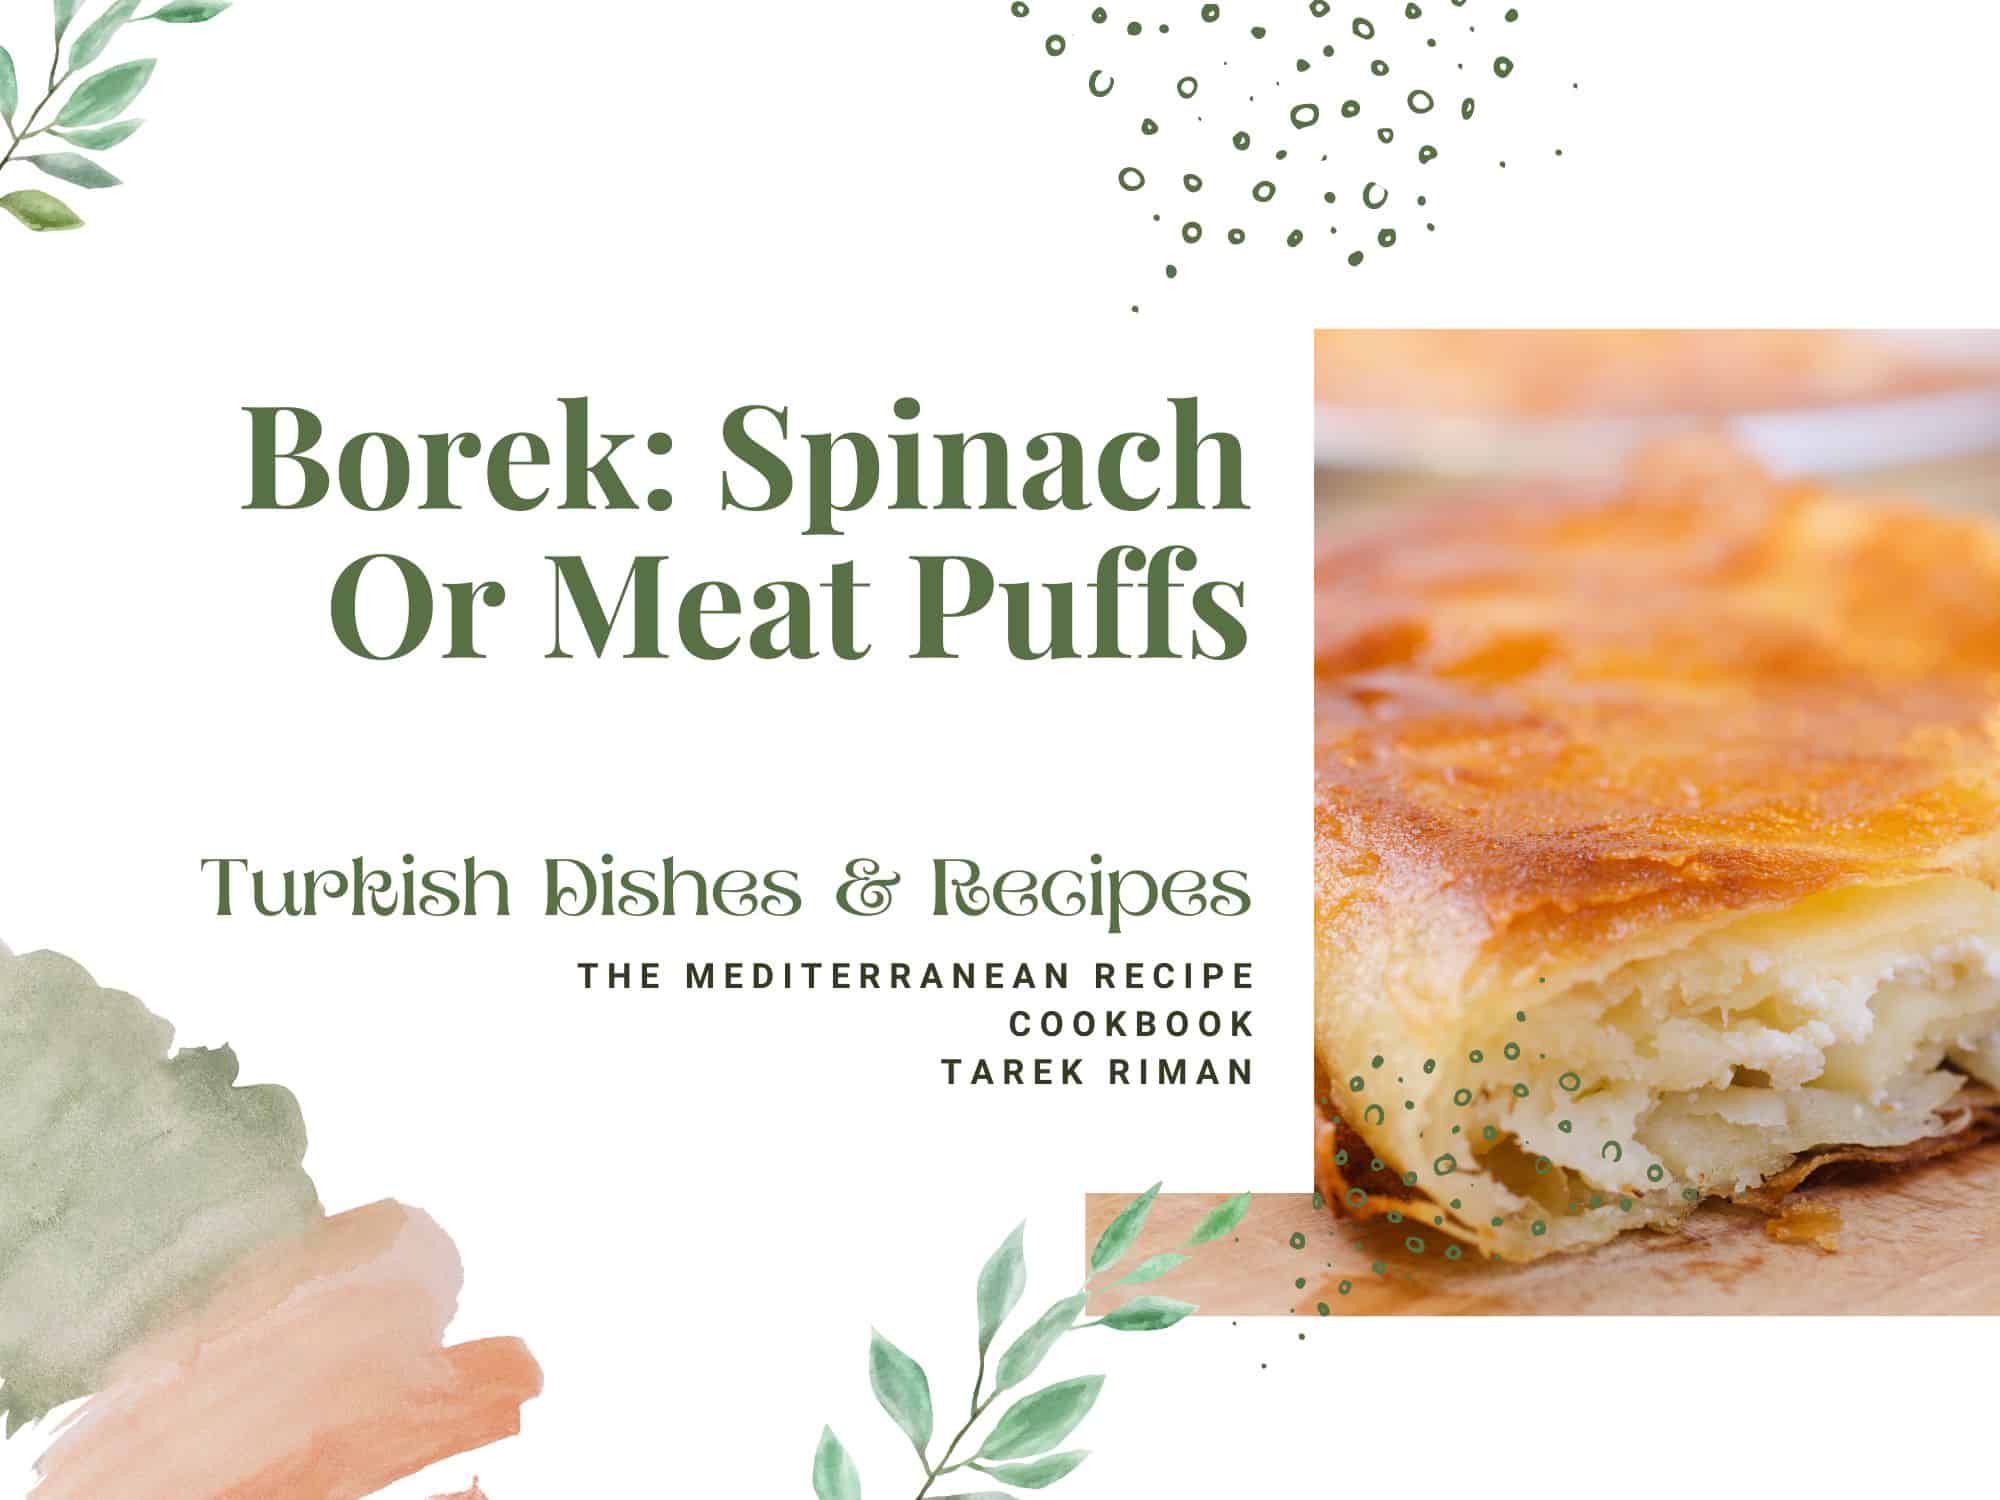 Borek: Spinach Or Meat Puffs - Turkish Dishes & Recipes